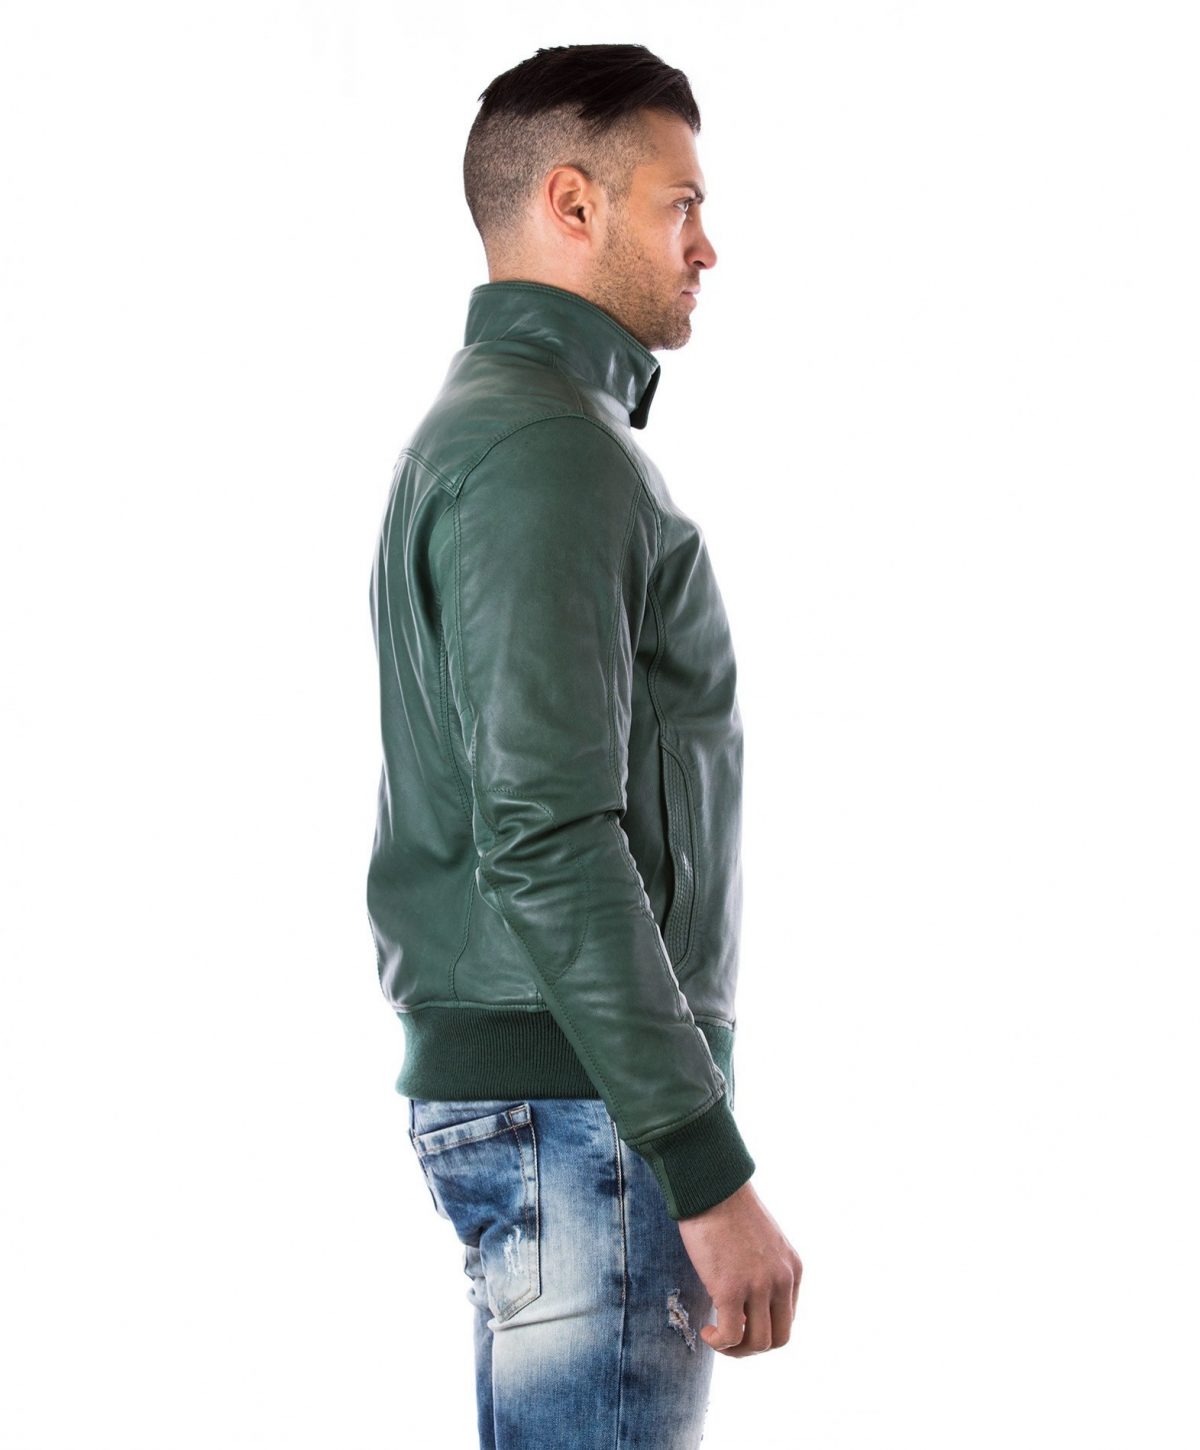 men-s-leather-jacket-genuine-soft-leather-style-bomber-bicolor-wool-cuffs-and-bottom-one-zip-pocket-green-color-thil (3)